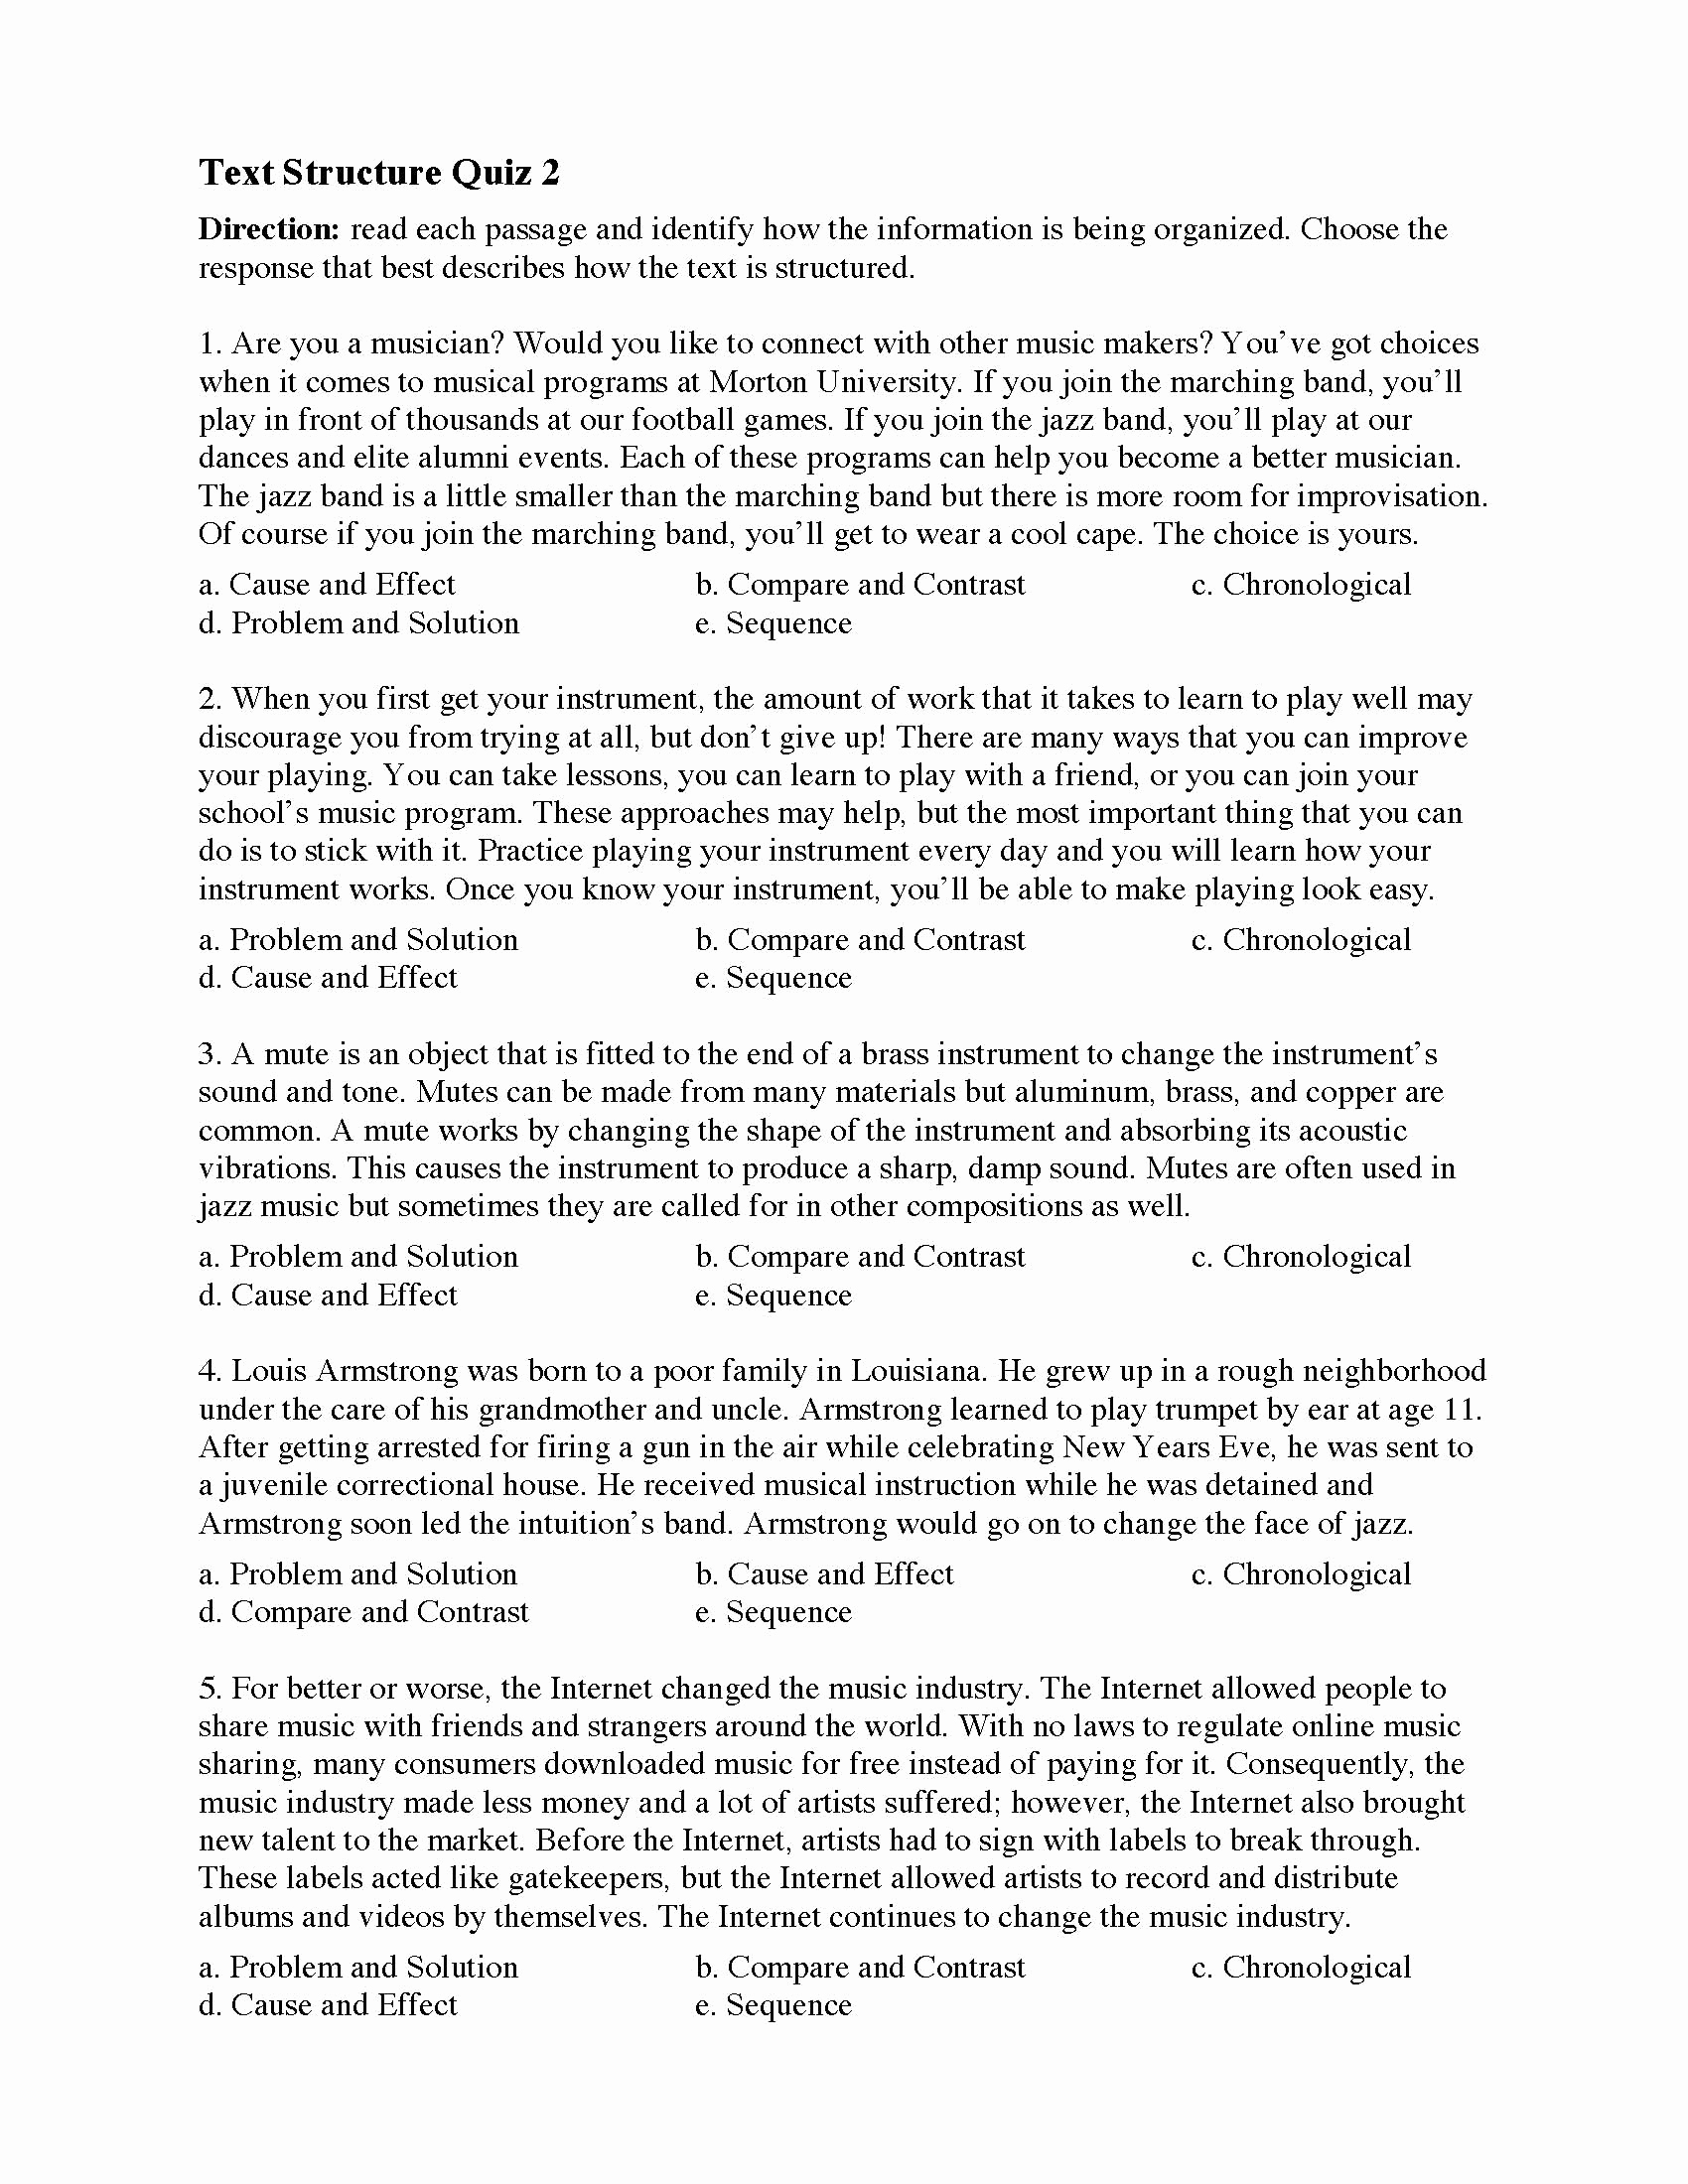 Text Structure Practice Worksheets Best Of Text Structure Quiz 2